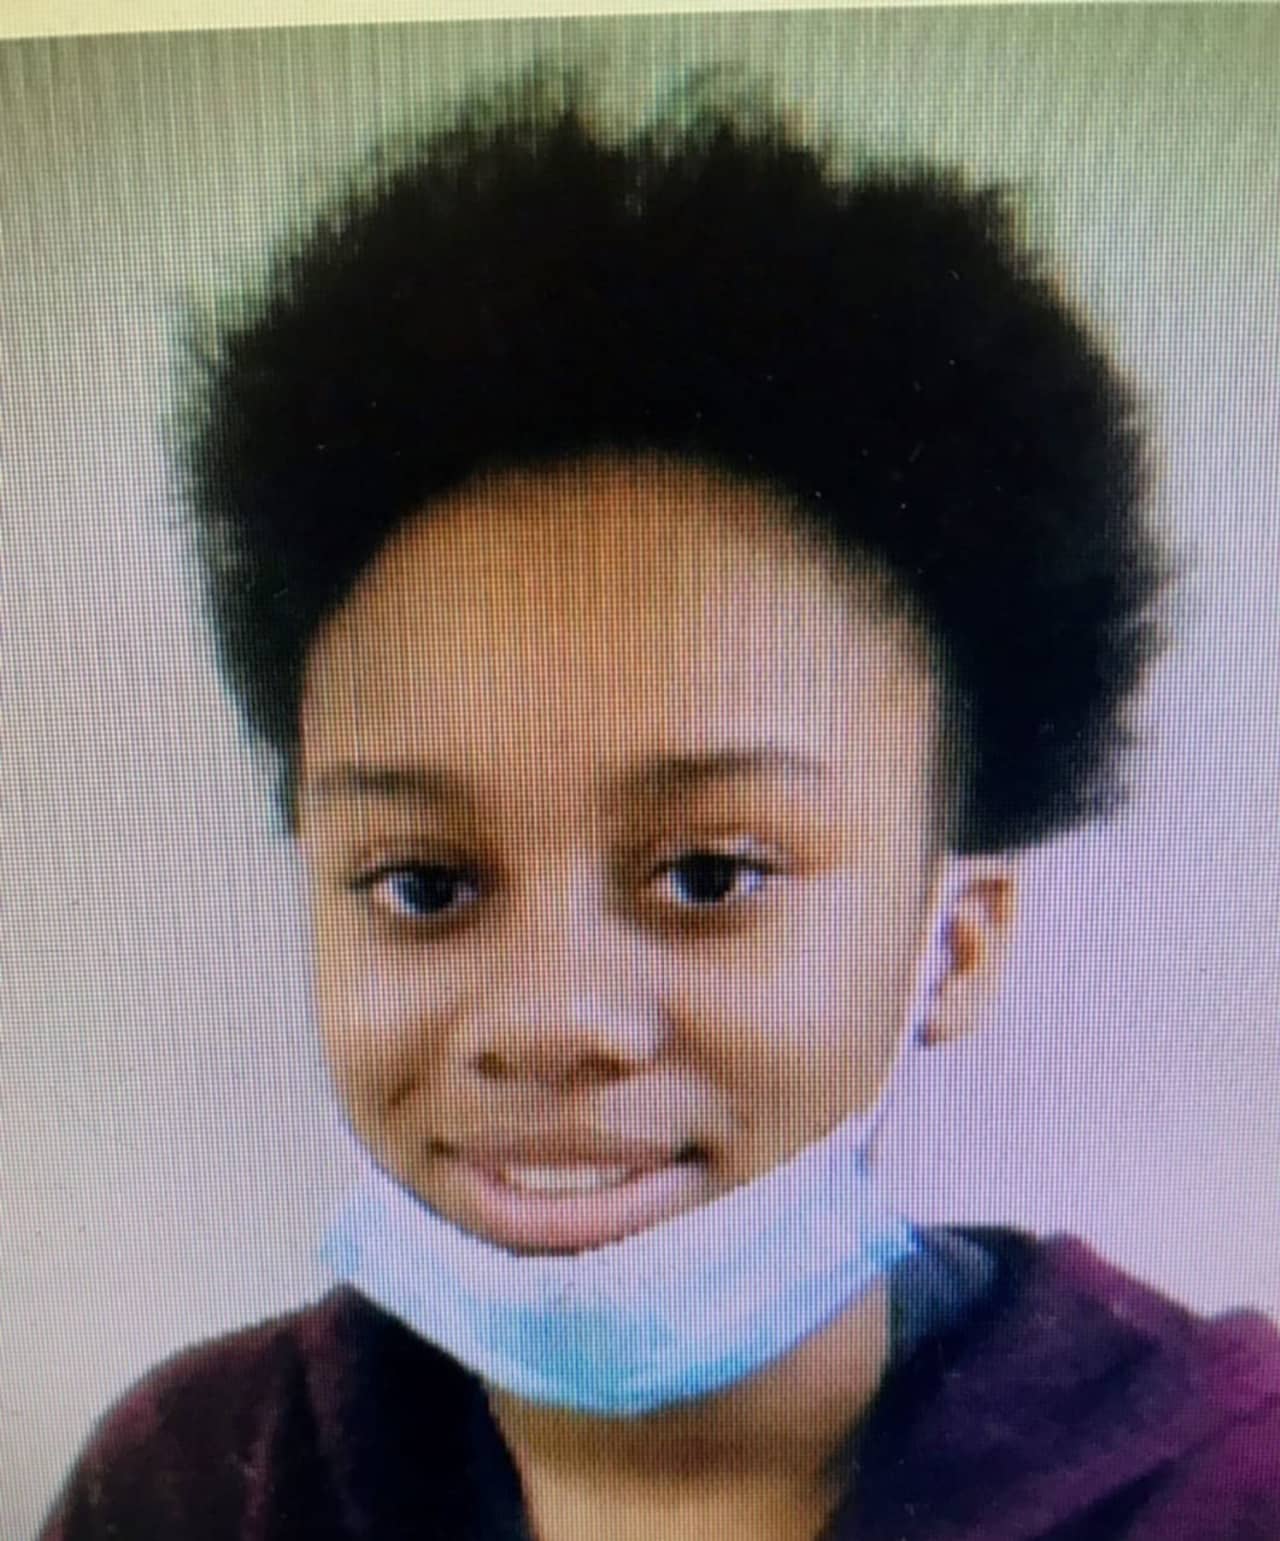 Alert Issued For Missing Long Island 12-Year-Old | Suffolk Daily Voice